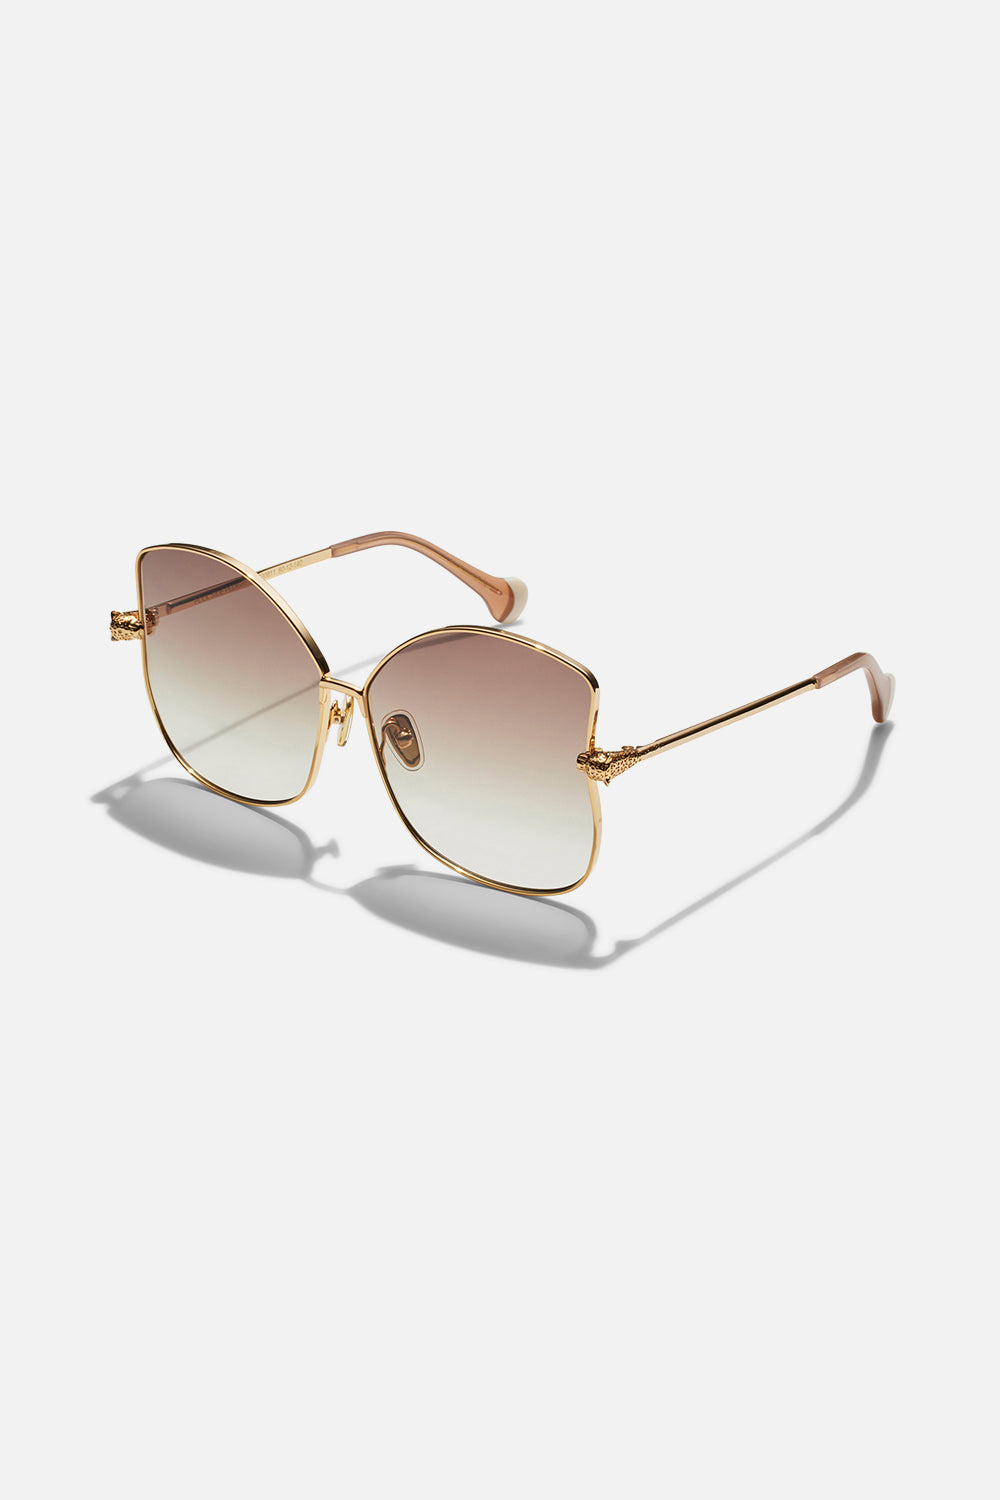 Pool Side Pedigree oversized soft gold  framed sunglasses  by CAMILLA